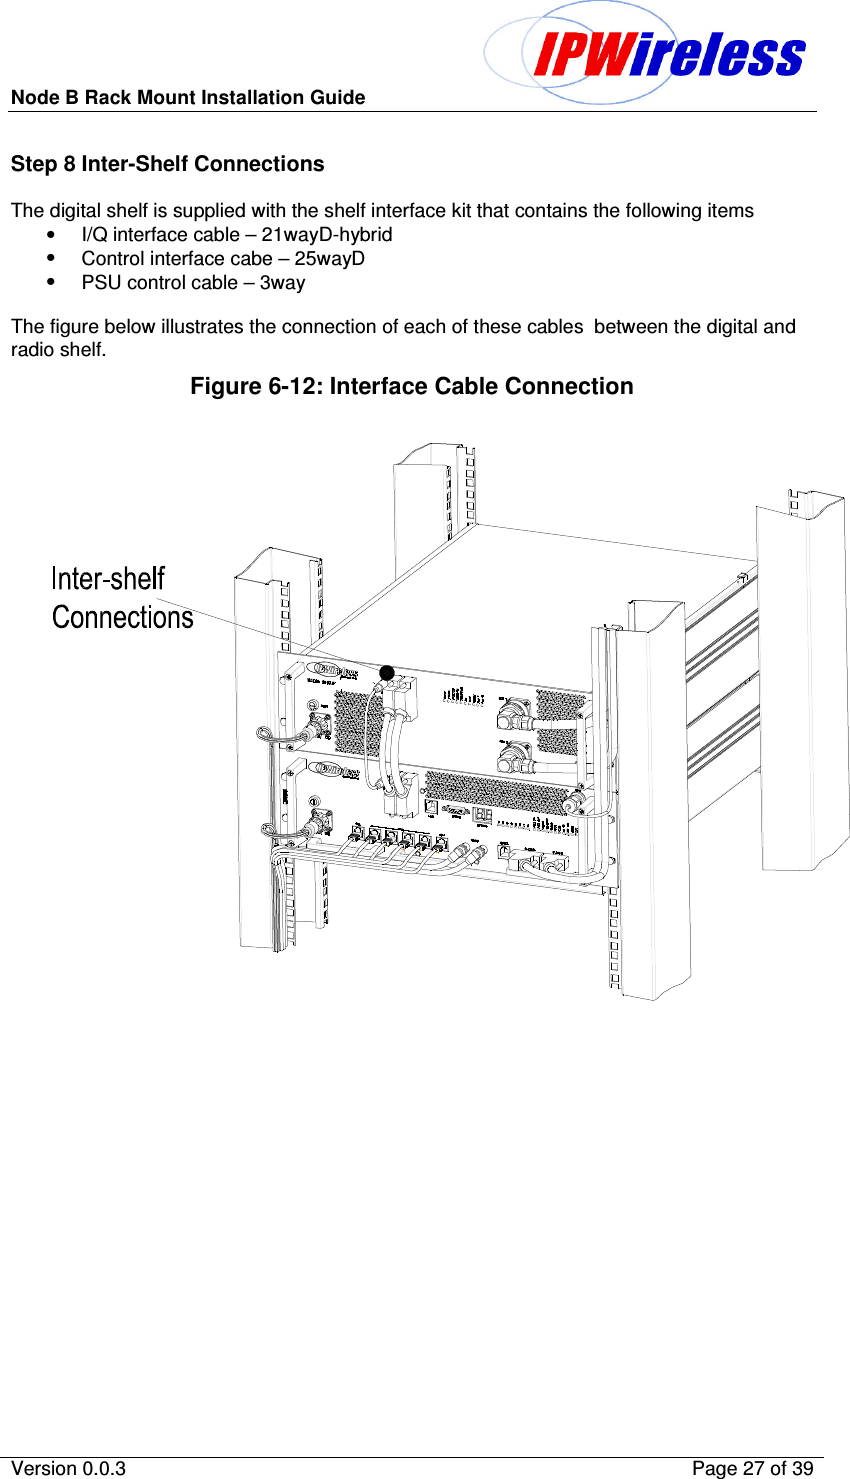 Node B Rack Mount Installation Guide                          Version 0.0.3    Page 27 of 39  Step 8 Inter-Shelf Connections The digital shelf is supplied with the shelf interface kit that contains the following items •  I/Q interface cable – 21wayD-hybrid •  Control interface cabe – 25wayD •  PSU control cable – 3way  The figure below illustrates the connection of each of these cables  between the digital and radio shelf. Figure 6-12: Interface Cable Connection   